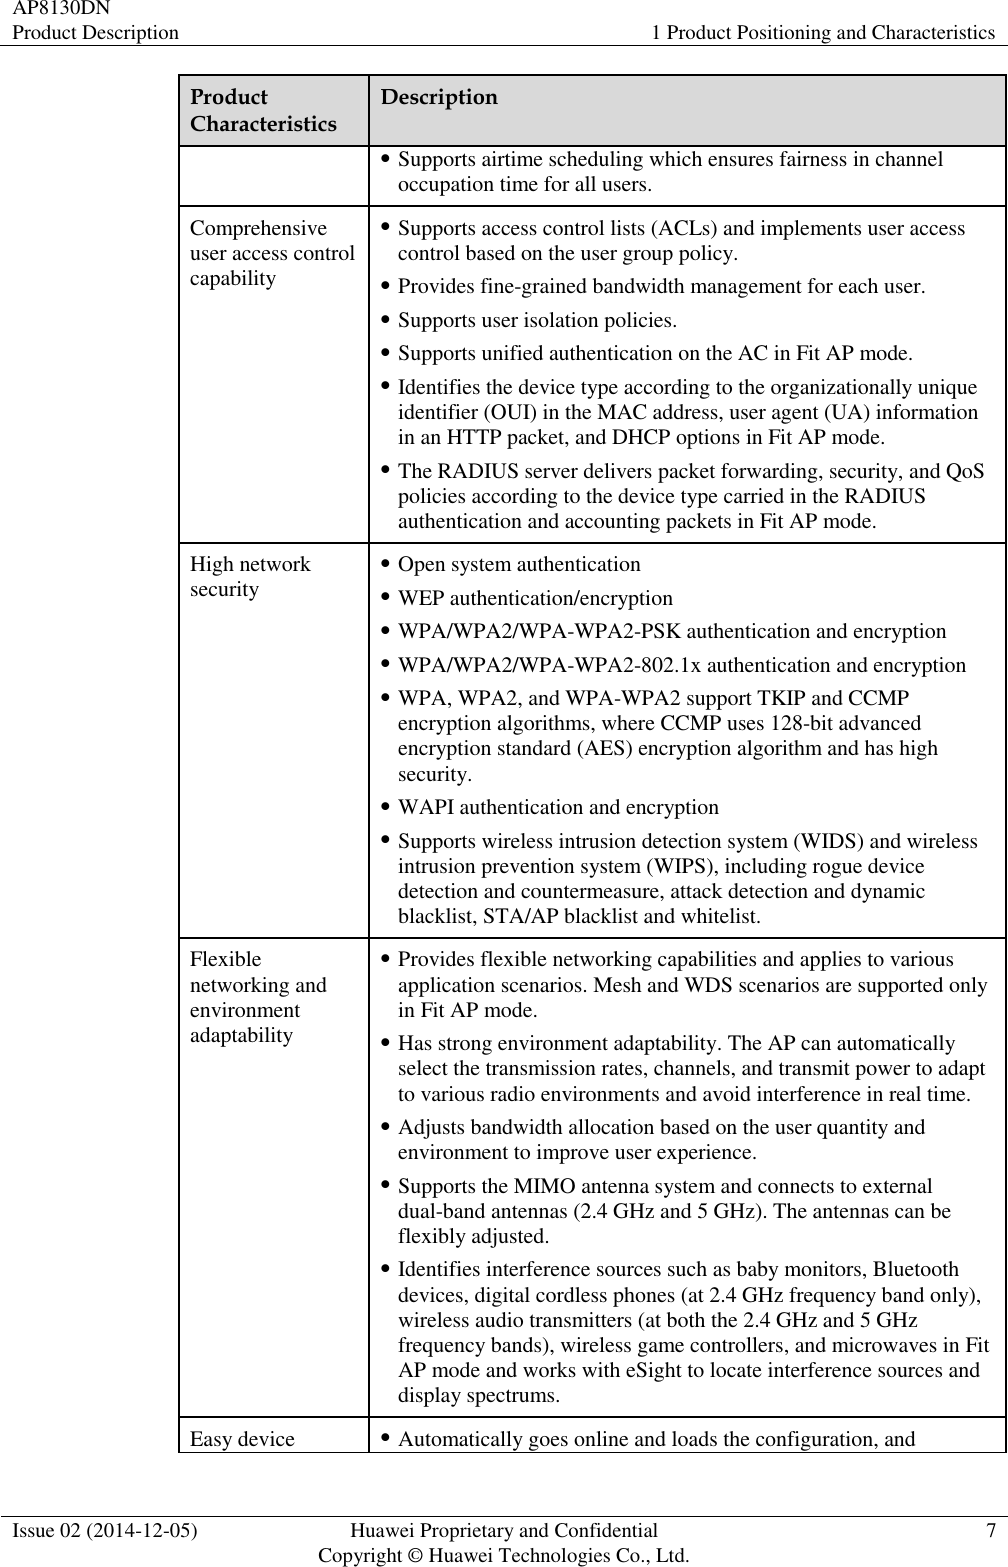 AP8130DN Product Description 1 Product Positioning and Characteristics  Issue 02 (2014-12-05) Huawei Proprietary and Confidential                                     Copyright © Huawei Technologies Co., Ltd. 7  Product Characteristics Description  Supports airtime scheduling which ensures fairness in channel occupation time for all users. Comprehensive user access control capability  Supports access control lists (ACLs) and implements user access control based on the user group policy.  Provides fine-grained bandwidth management for each user.  Supports user isolation policies.  Supports unified authentication on the AC in Fit AP mode.  Identifies the device type according to the organizationally unique identifier (OUI) in the MAC address, user agent (UA) information in an HTTP packet, and DHCP options in Fit AP mode.  The RADIUS server delivers packet forwarding, security, and QoS policies according to the device type carried in the RADIUS authentication and accounting packets in Fit AP mode. High network security  Open system authentication  WEP authentication/encryption  WPA/WPA2/WPA-WPA2-PSK authentication and encryption  WPA/WPA2/WPA-WPA2-802.1x authentication and encryption  WPA, WPA2, and WPA-WPA2 support TKIP and CCMP encryption algorithms, where CCMP uses 128-bit advanced encryption standard (AES) encryption algorithm and has high security.  WAPI authentication and encryption  Supports wireless intrusion detection system (WIDS) and wireless   intrusion prevention system (WIPS), including rogue device   detection and countermeasure, attack detection and dynamic   blacklist, STA/AP blacklist and whitelist. Flexible networking and environment adaptability  Provides flexible networking capabilities and applies to various application scenarios. Mesh and WDS scenarios are supported only in Fit AP mode.  Has strong environment adaptability. The AP can automatically select the transmission rates, channels, and transmit power to adapt to various radio environments and avoid interference in real time.  Adjusts bandwidth allocation based on the user quantity and environment to improve user experience.  Supports the MIMO antenna system and connects to external dual-band antennas (2.4 GHz and 5 GHz). The antennas can be flexibly adjusted.  Identifies interference sources such as baby monitors, Bluetooth devices, digital cordless phones (at 2.4 GHz frequency band only), wireless audio transmitters (at both the 2.4 GHz and 5 GHz frequency bands), wireless game controllers, and microwaves in Fit AP mode and works with eSight to locate interference sources and display spectrums. Easy device  Automatically goes online and loads the configuration, and 